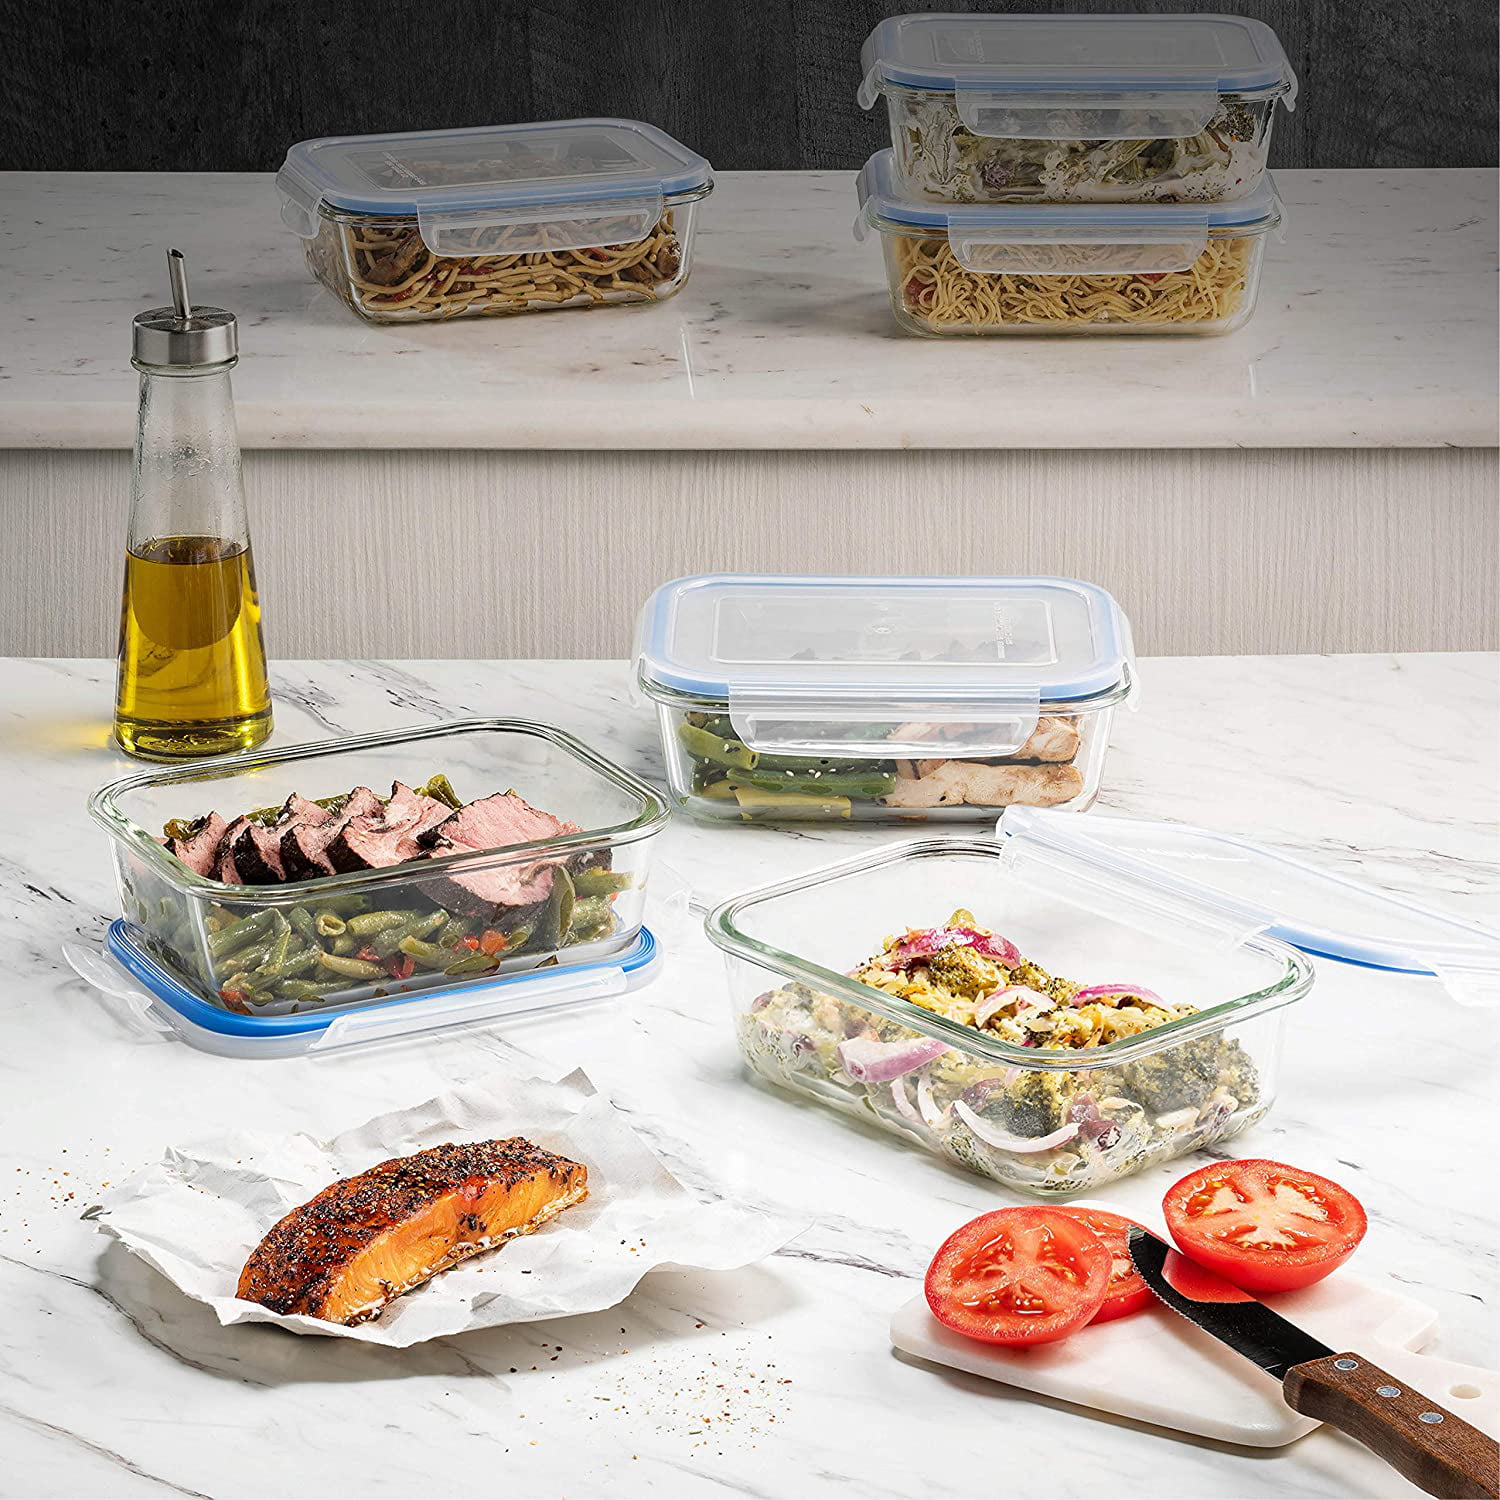  Portion Perfection Portion Control Containers - Glass Oven  Ready, Freezer Safe Meal Prep Containers Reusable for Food/Lunchbox 3pk, 3  Compartment with Lids, Practical Weight Loss Products: Home & Kitchen